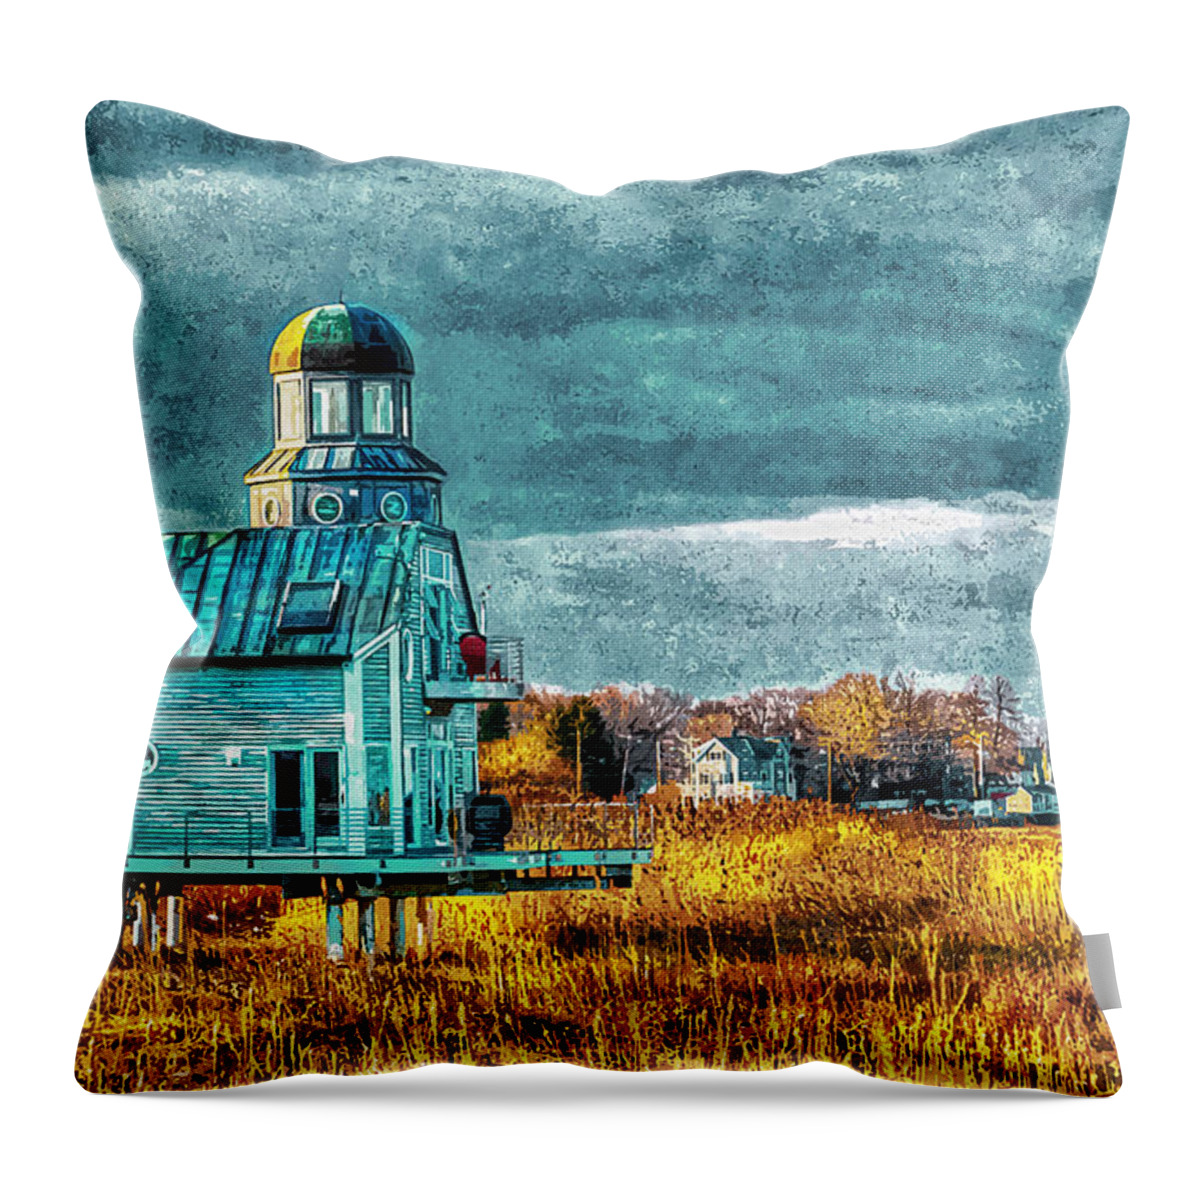 Watercolor Throw Pillow featuring the digital art Newbury House by Rick Mosher